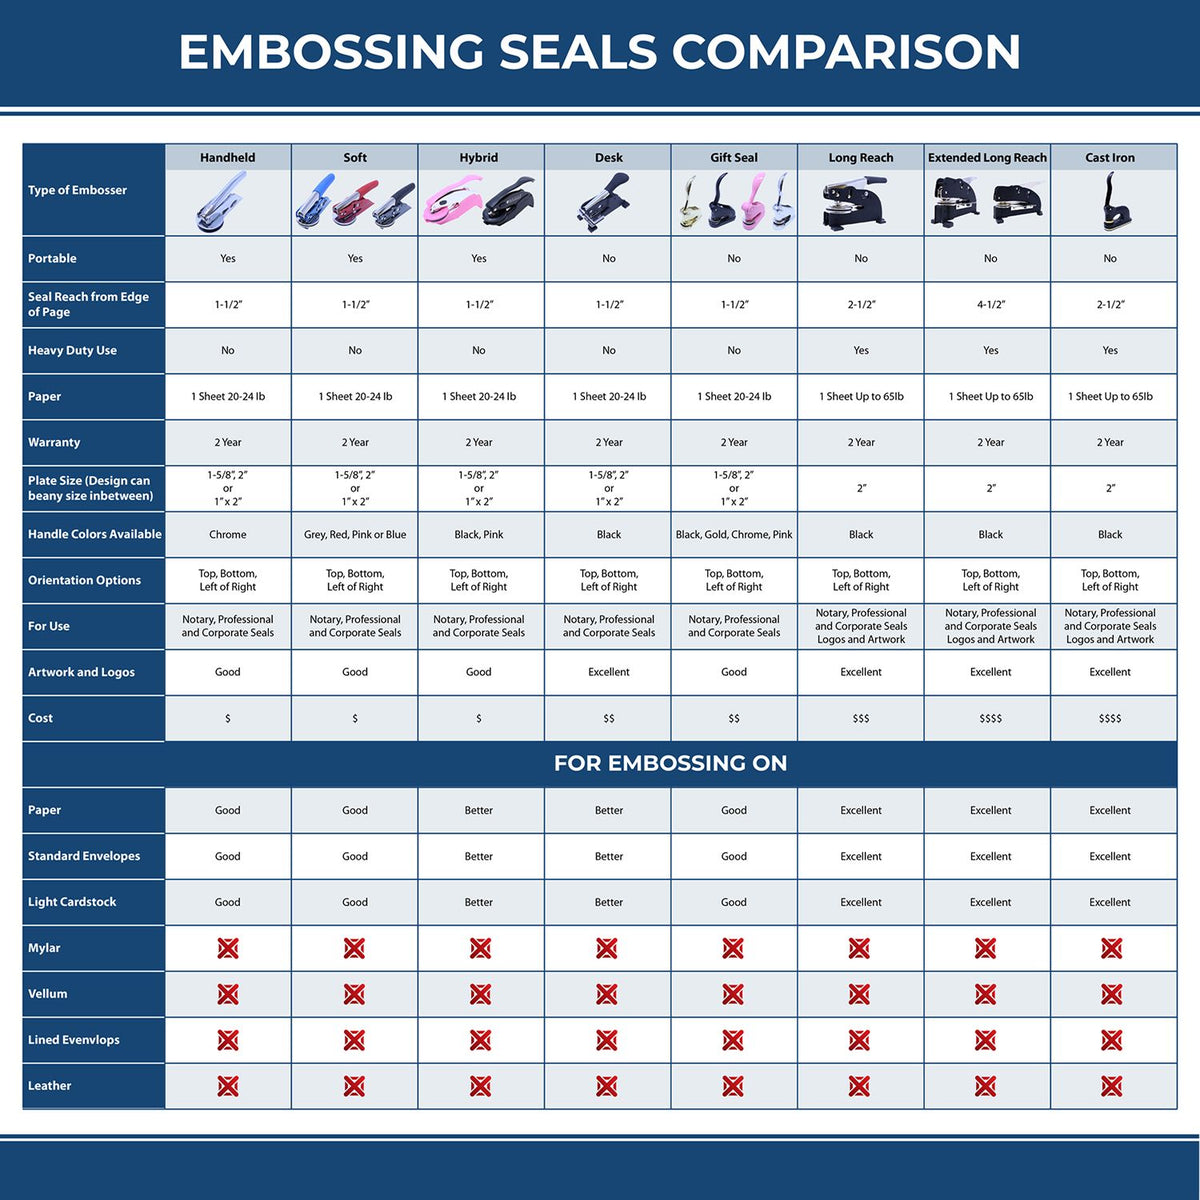 A comparison chart for the different types of mount models available for the Handheld Hawaii Professional Engineer Embosser.